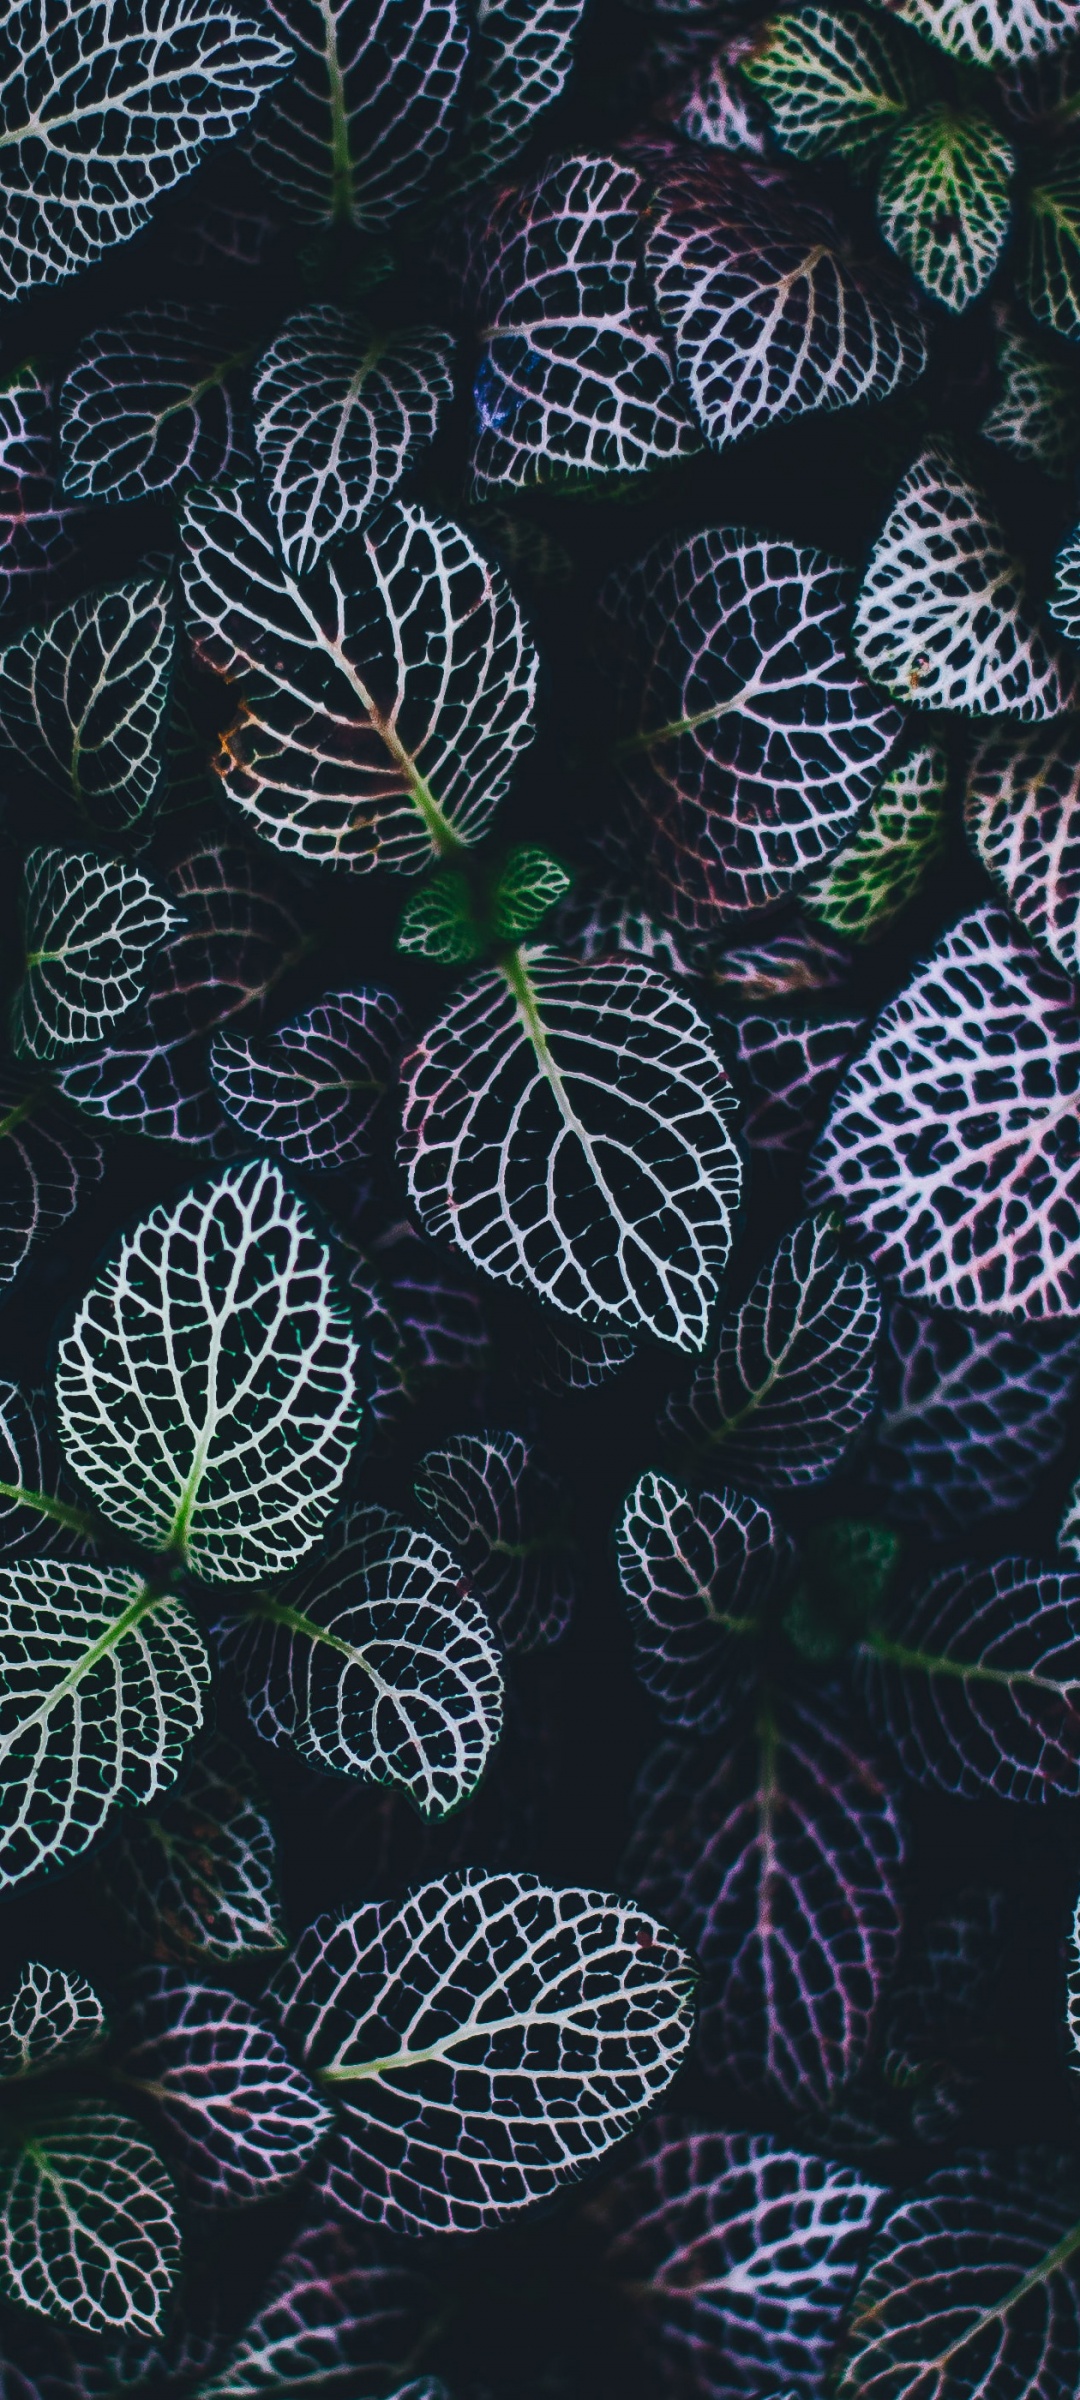 1500 Plant Wallpaper Pictures  Download Free Images on Unsplash